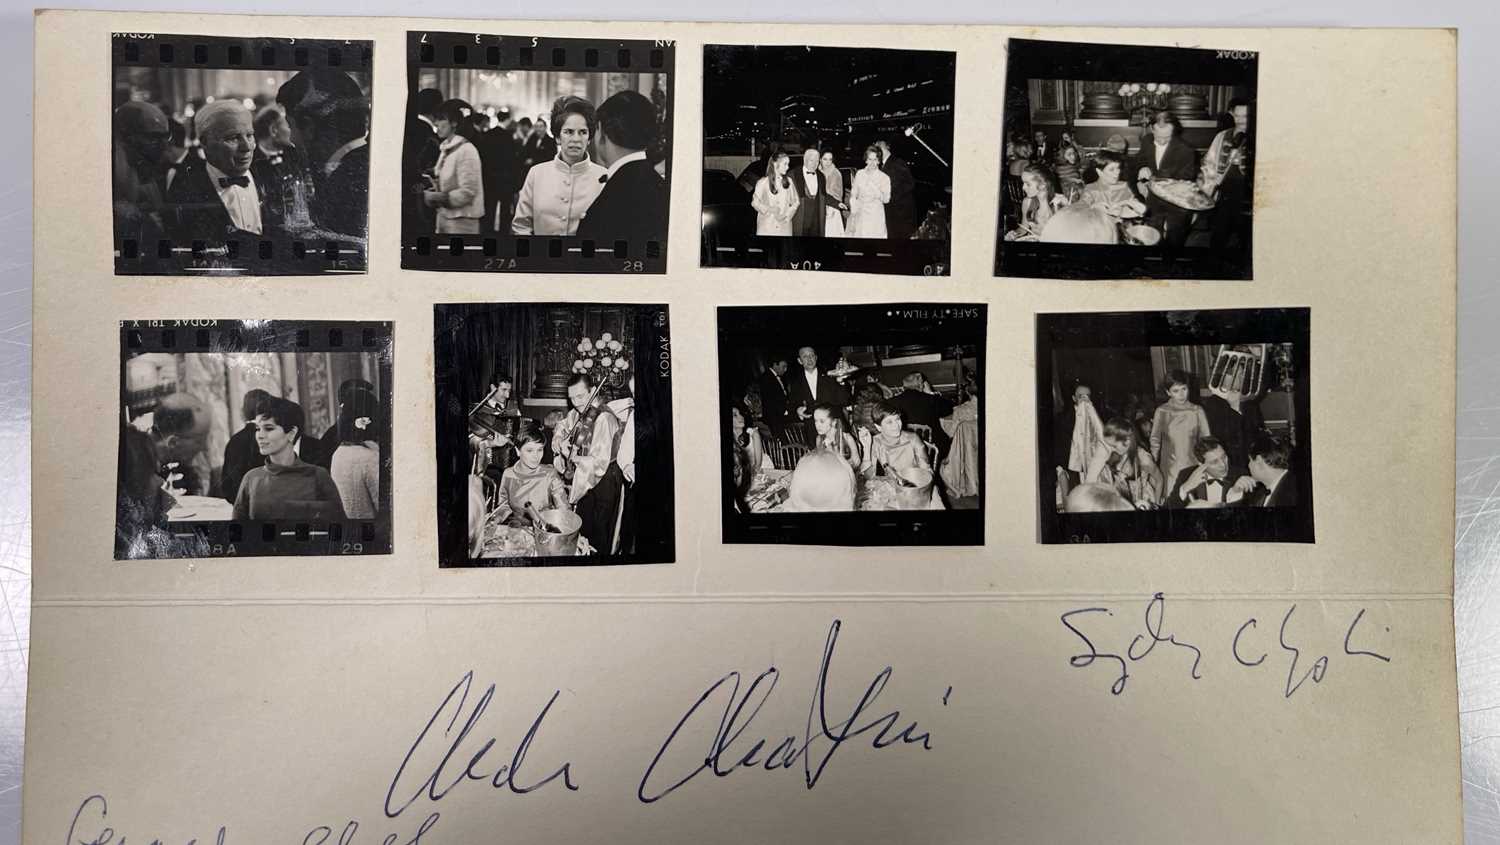 CHARLIE CHAPLIN - SIGNED CARD AND ORIGINAL IMAGES FROM 1967 GALA DINNER. - Image 3 of 4